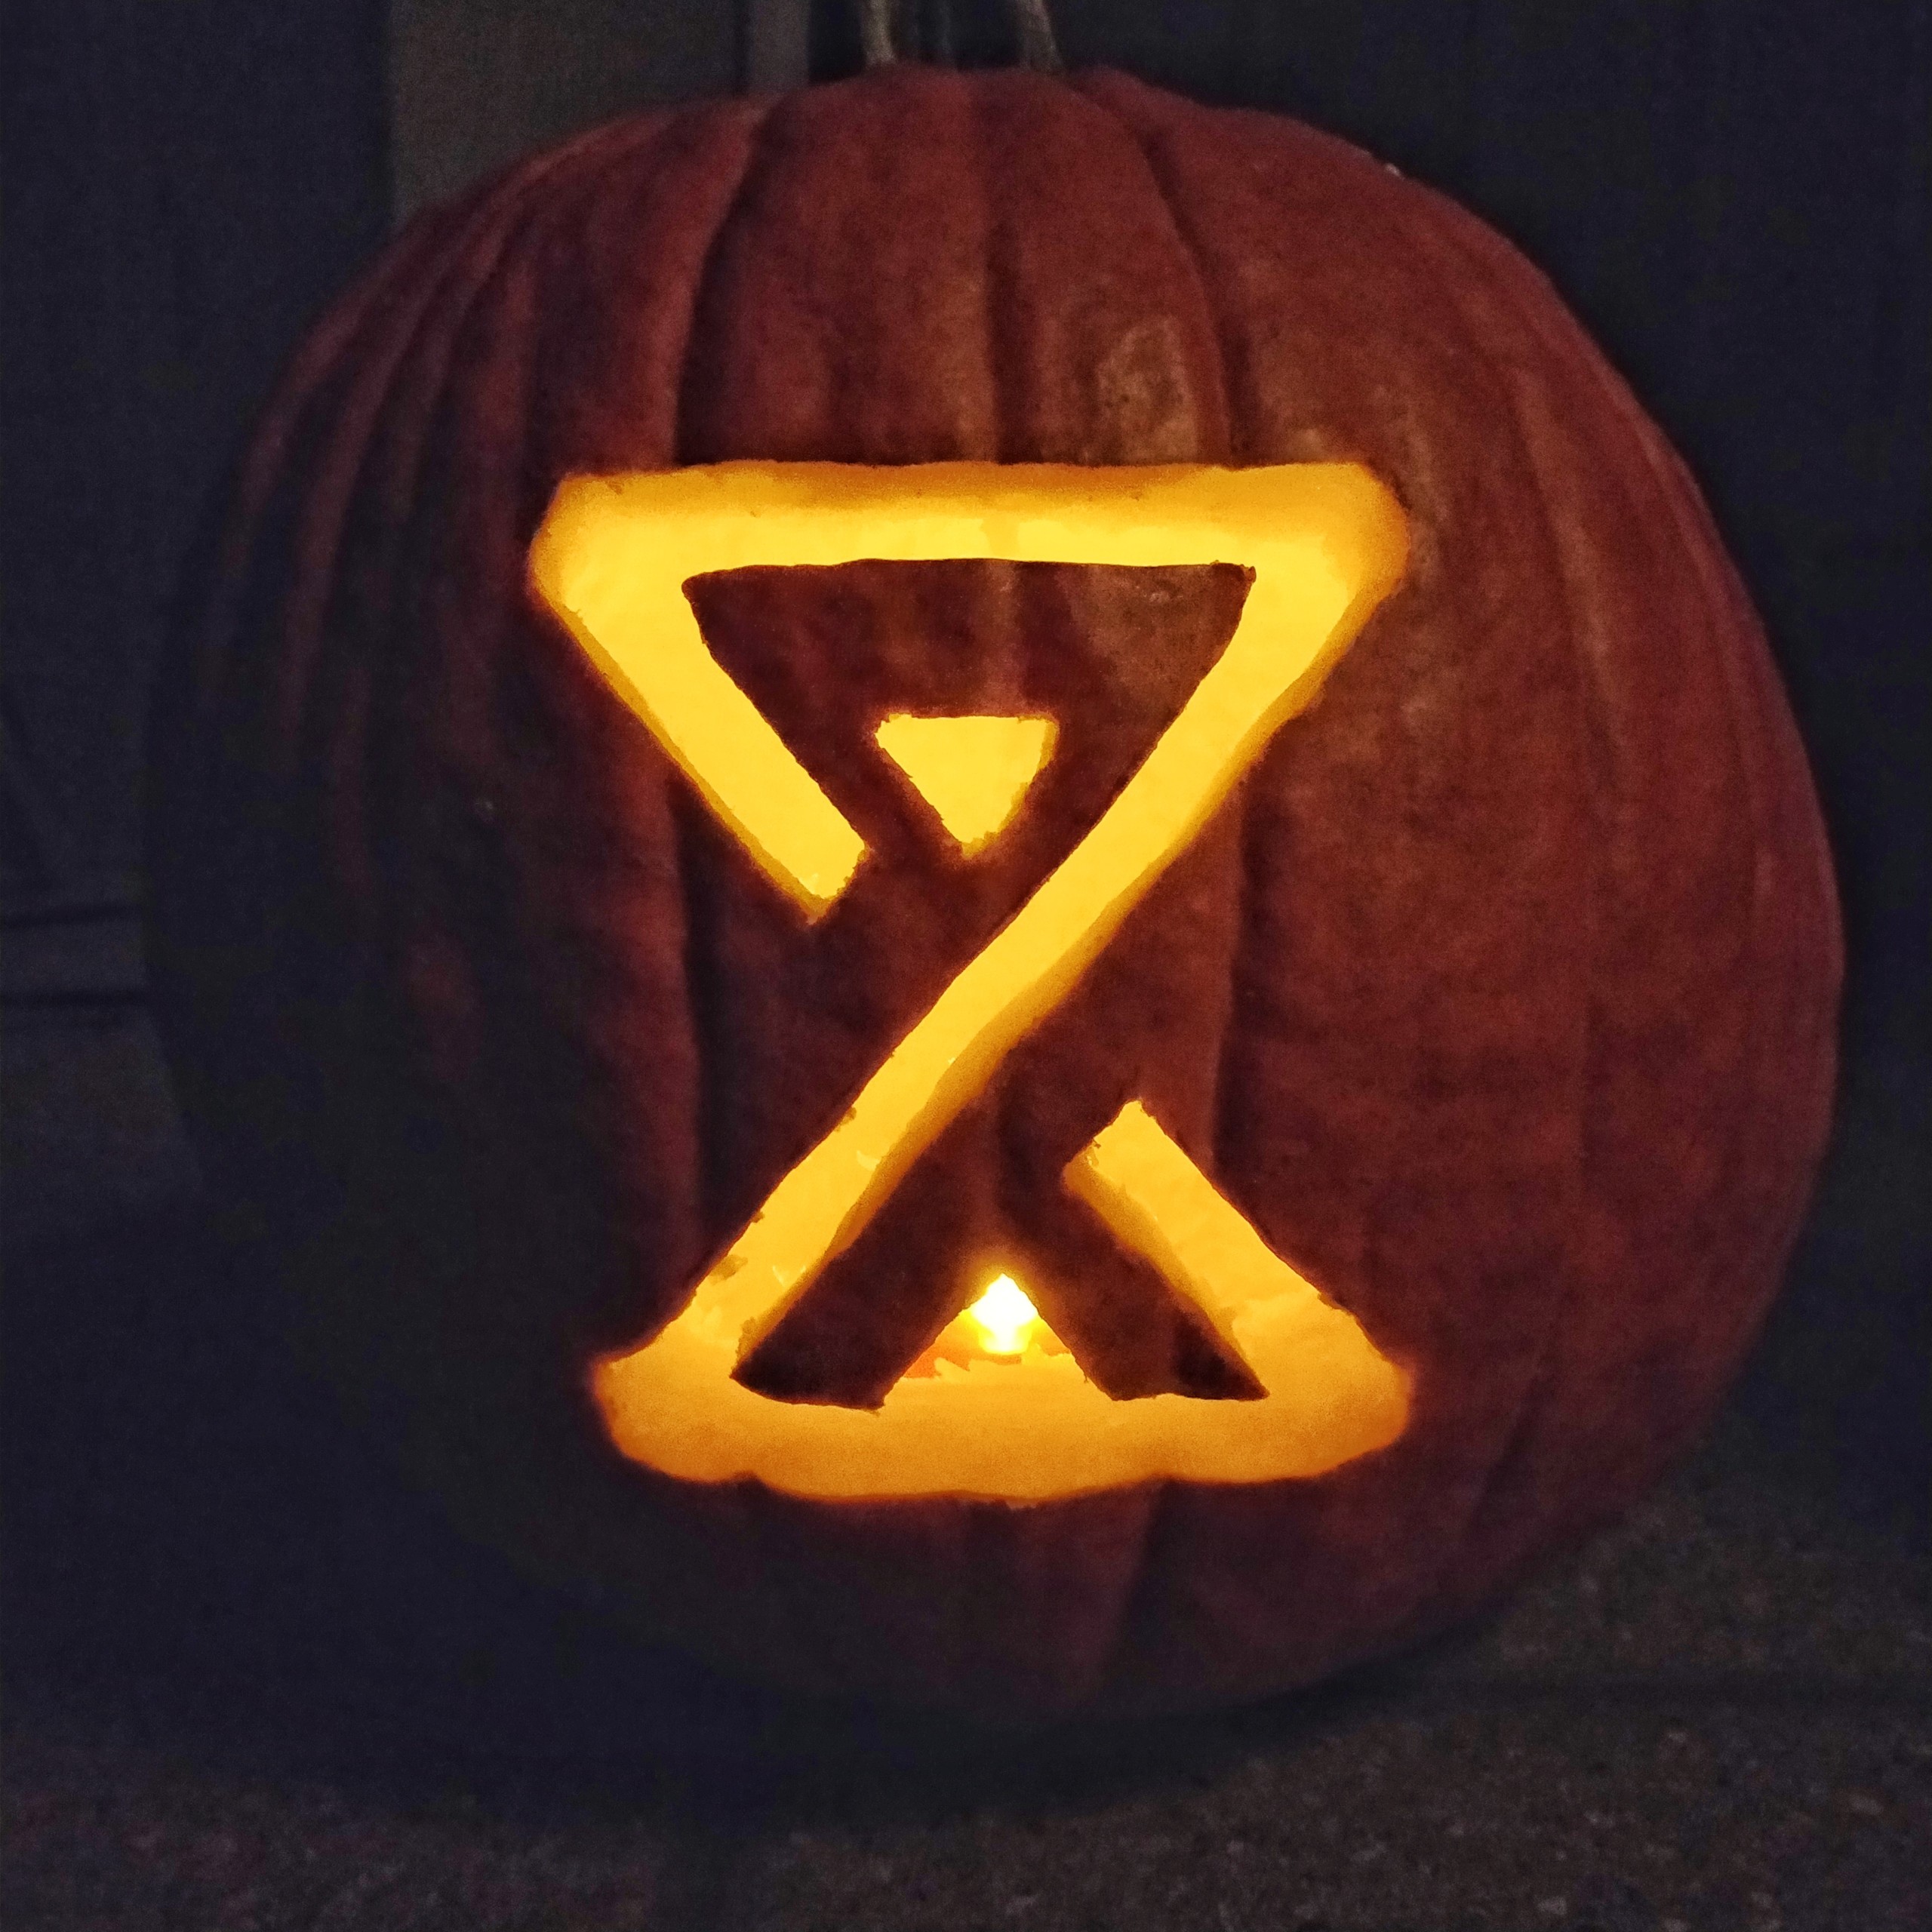 Pumpkin carved with the Crock of Time hourglass symbol, lit from within